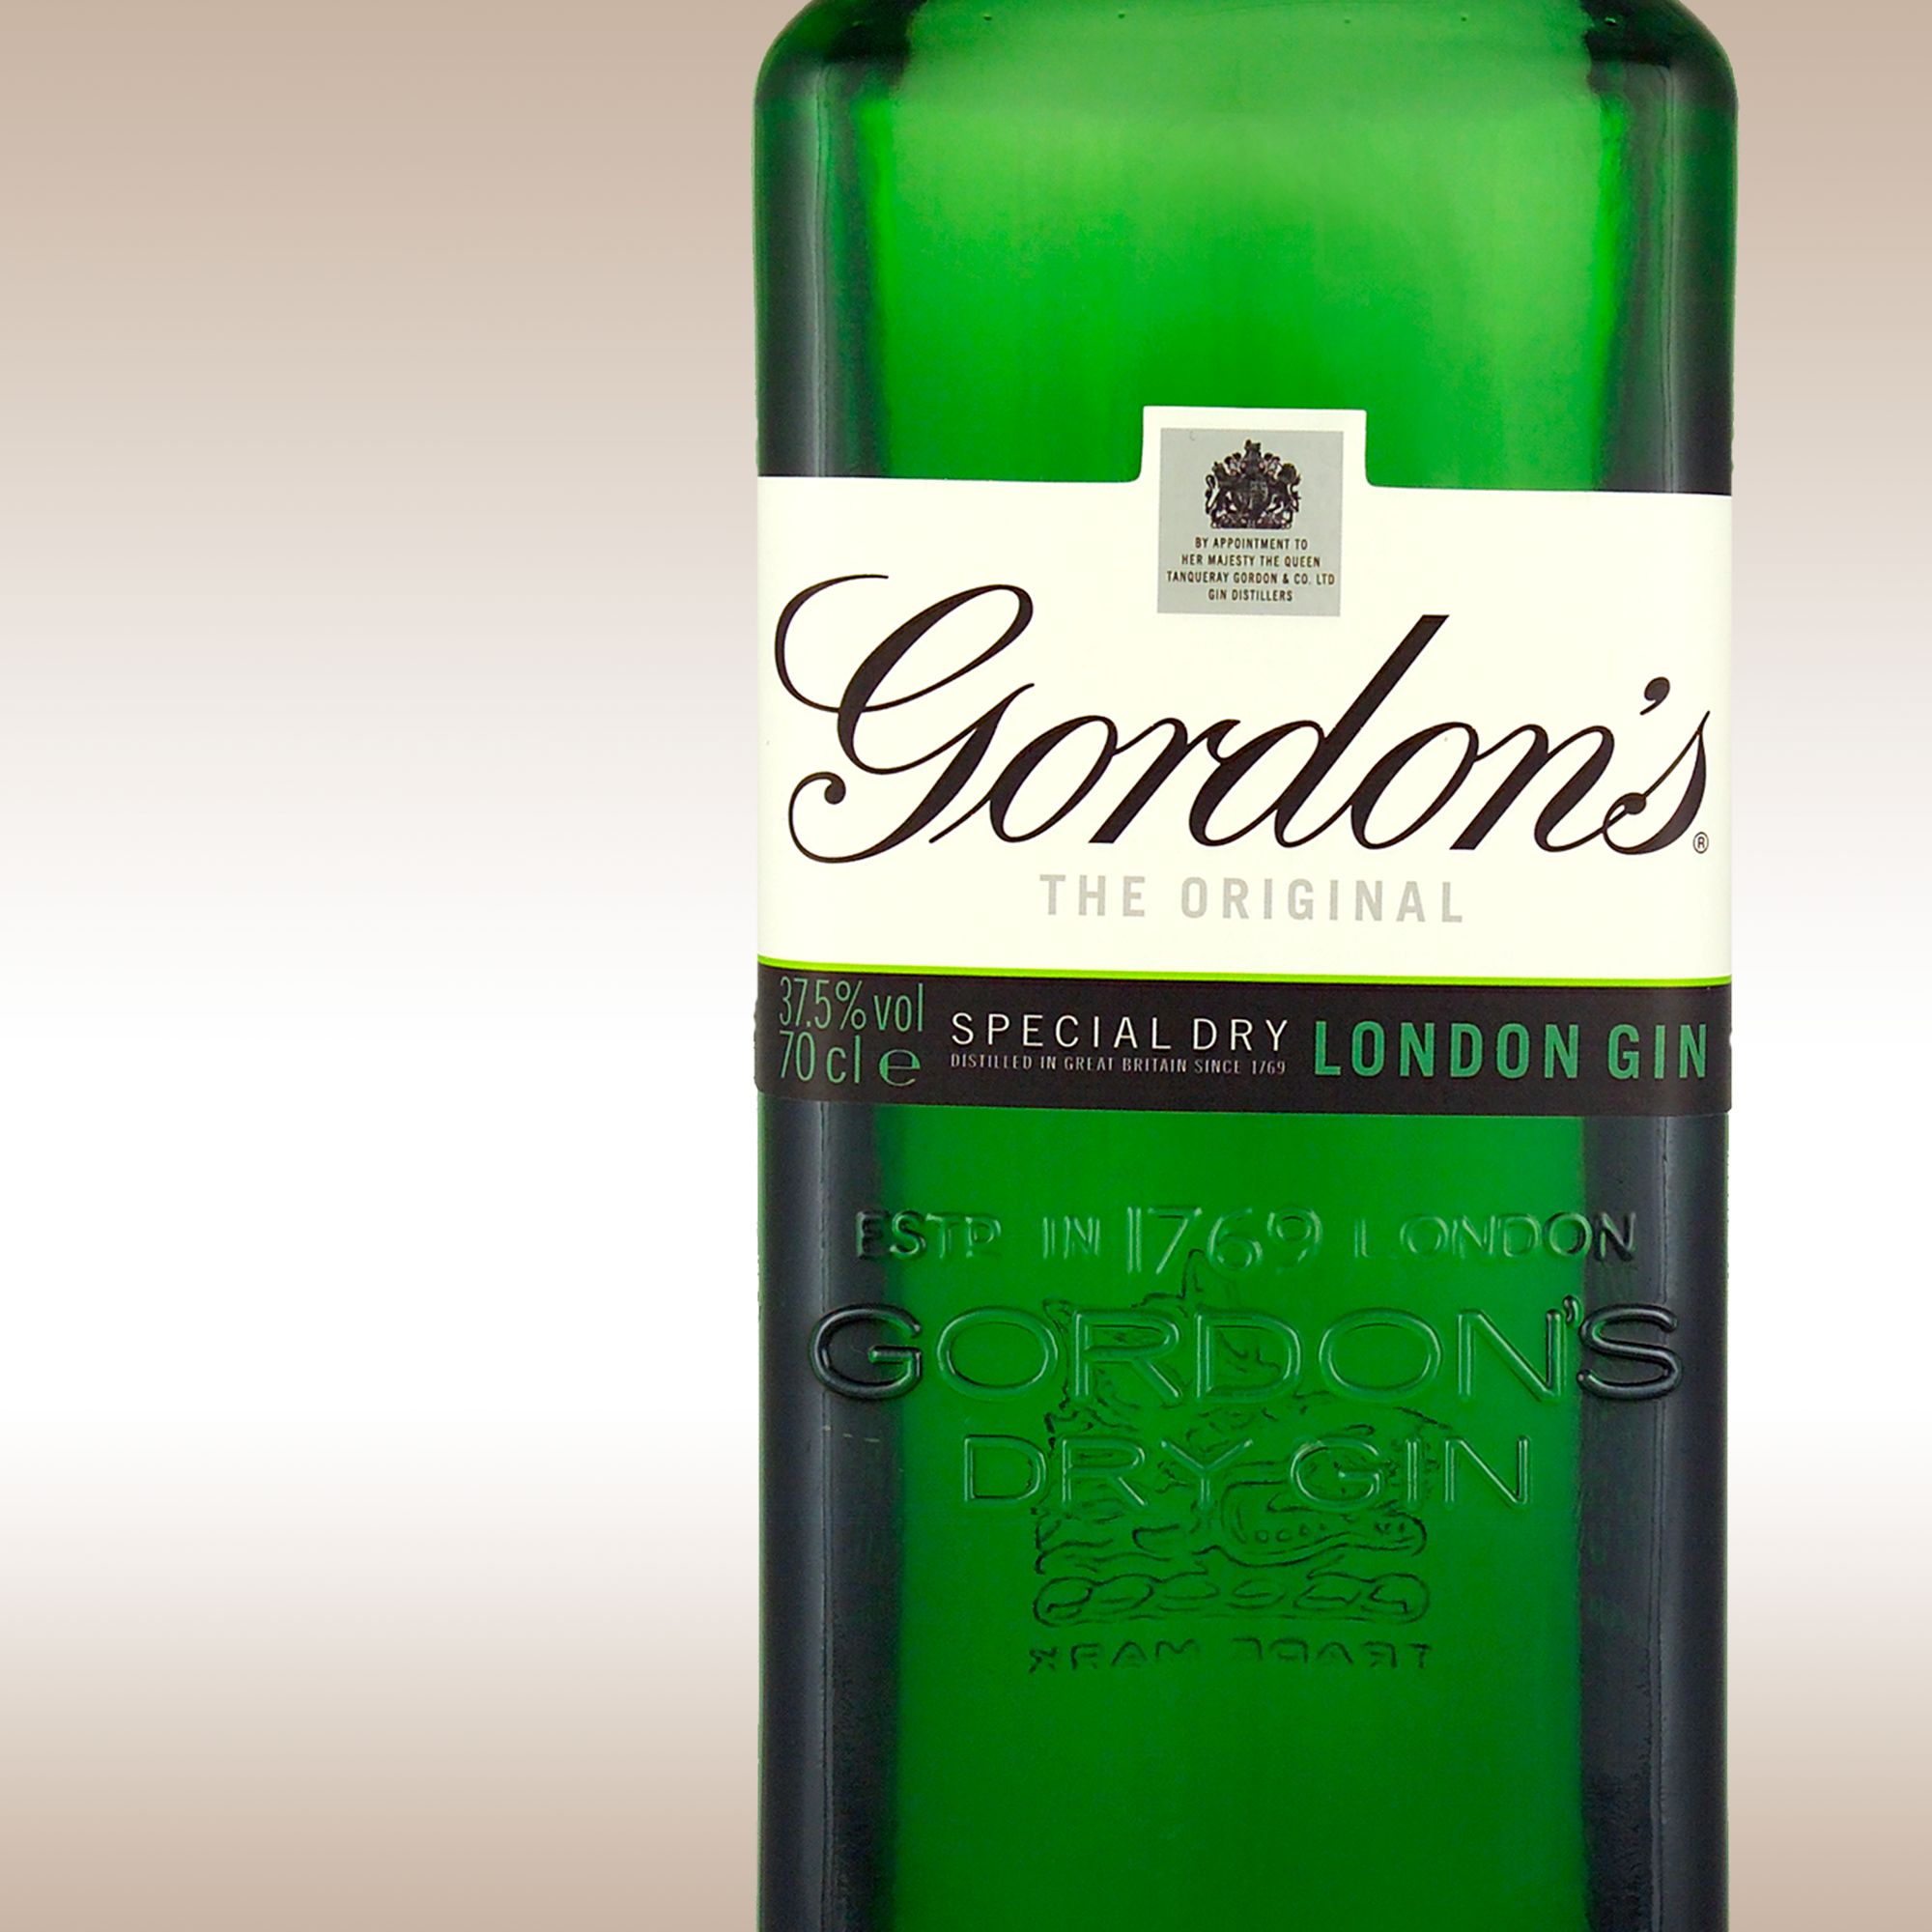 Gordon's Special Dry London Gin, 1 Litre at JohnLewis